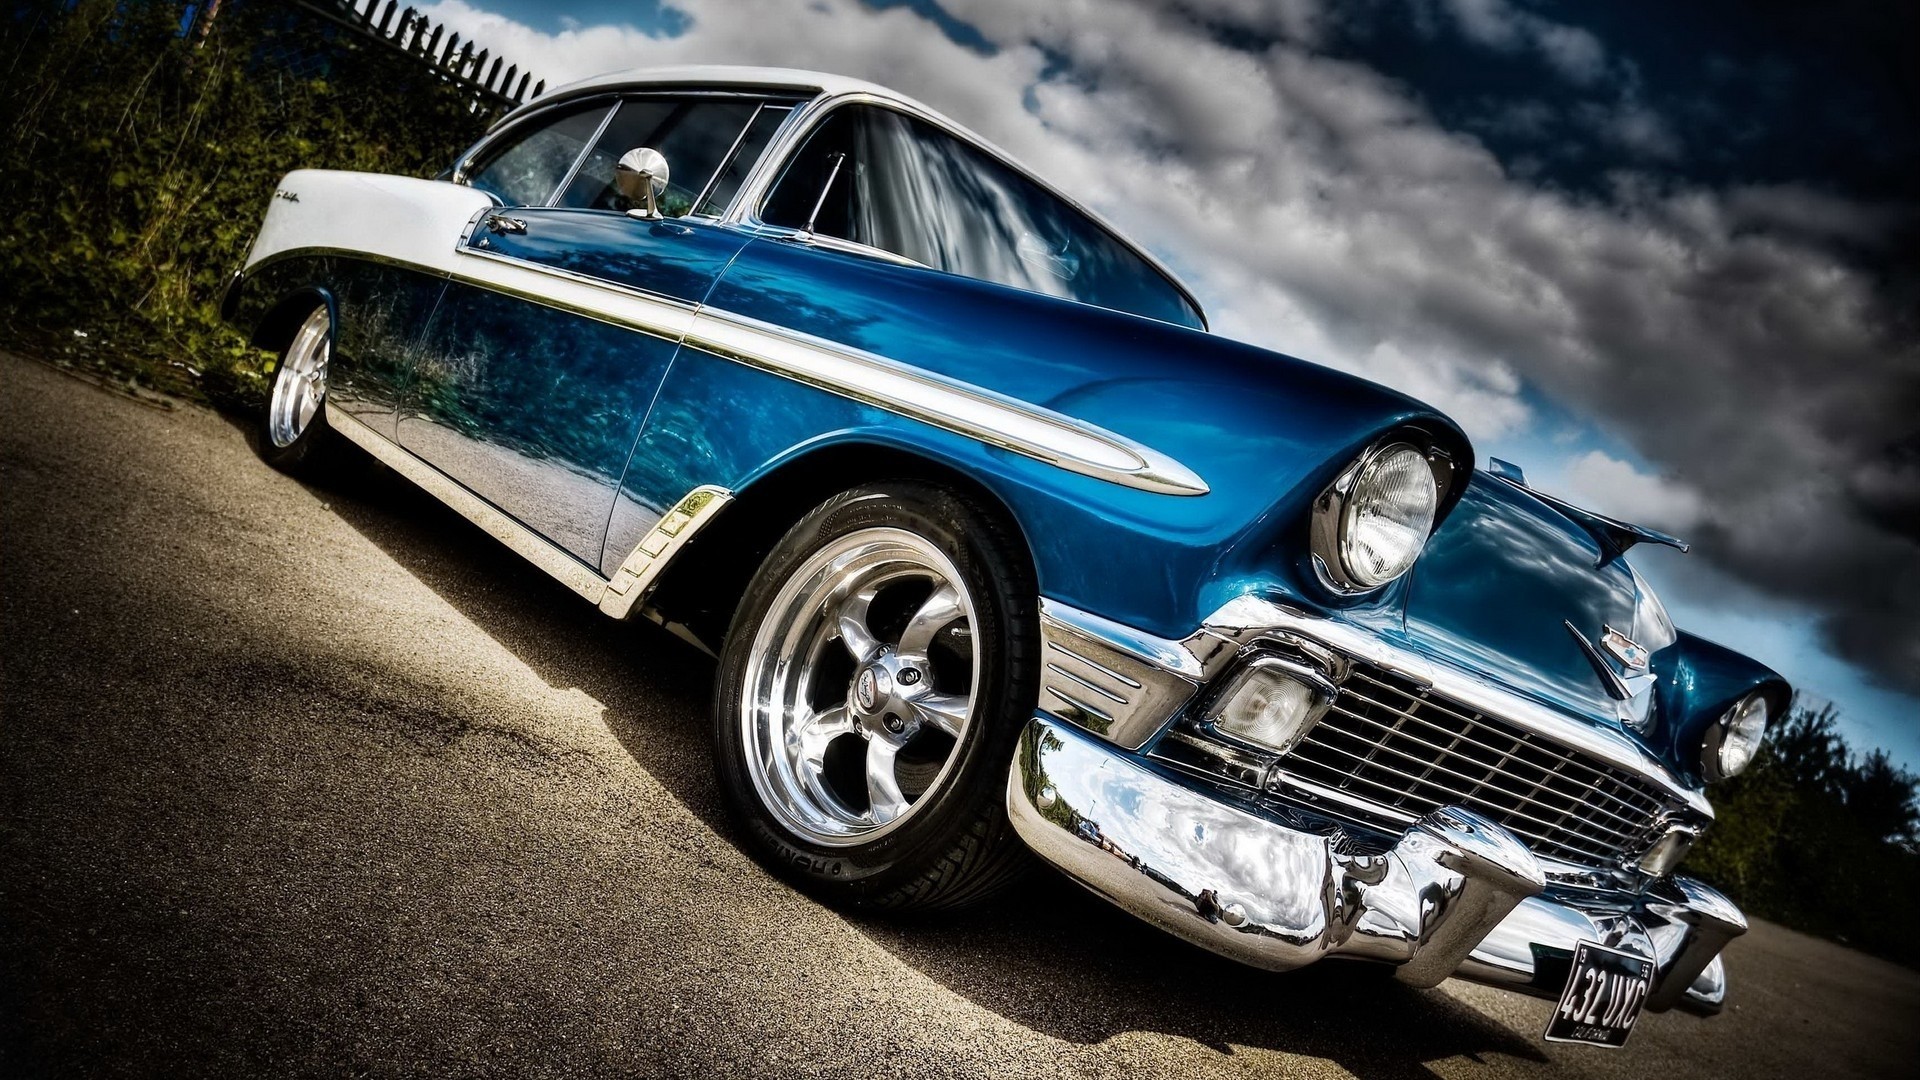 Blue Chevy HD Wallpaper Download Photos Amazing High 1920x1080